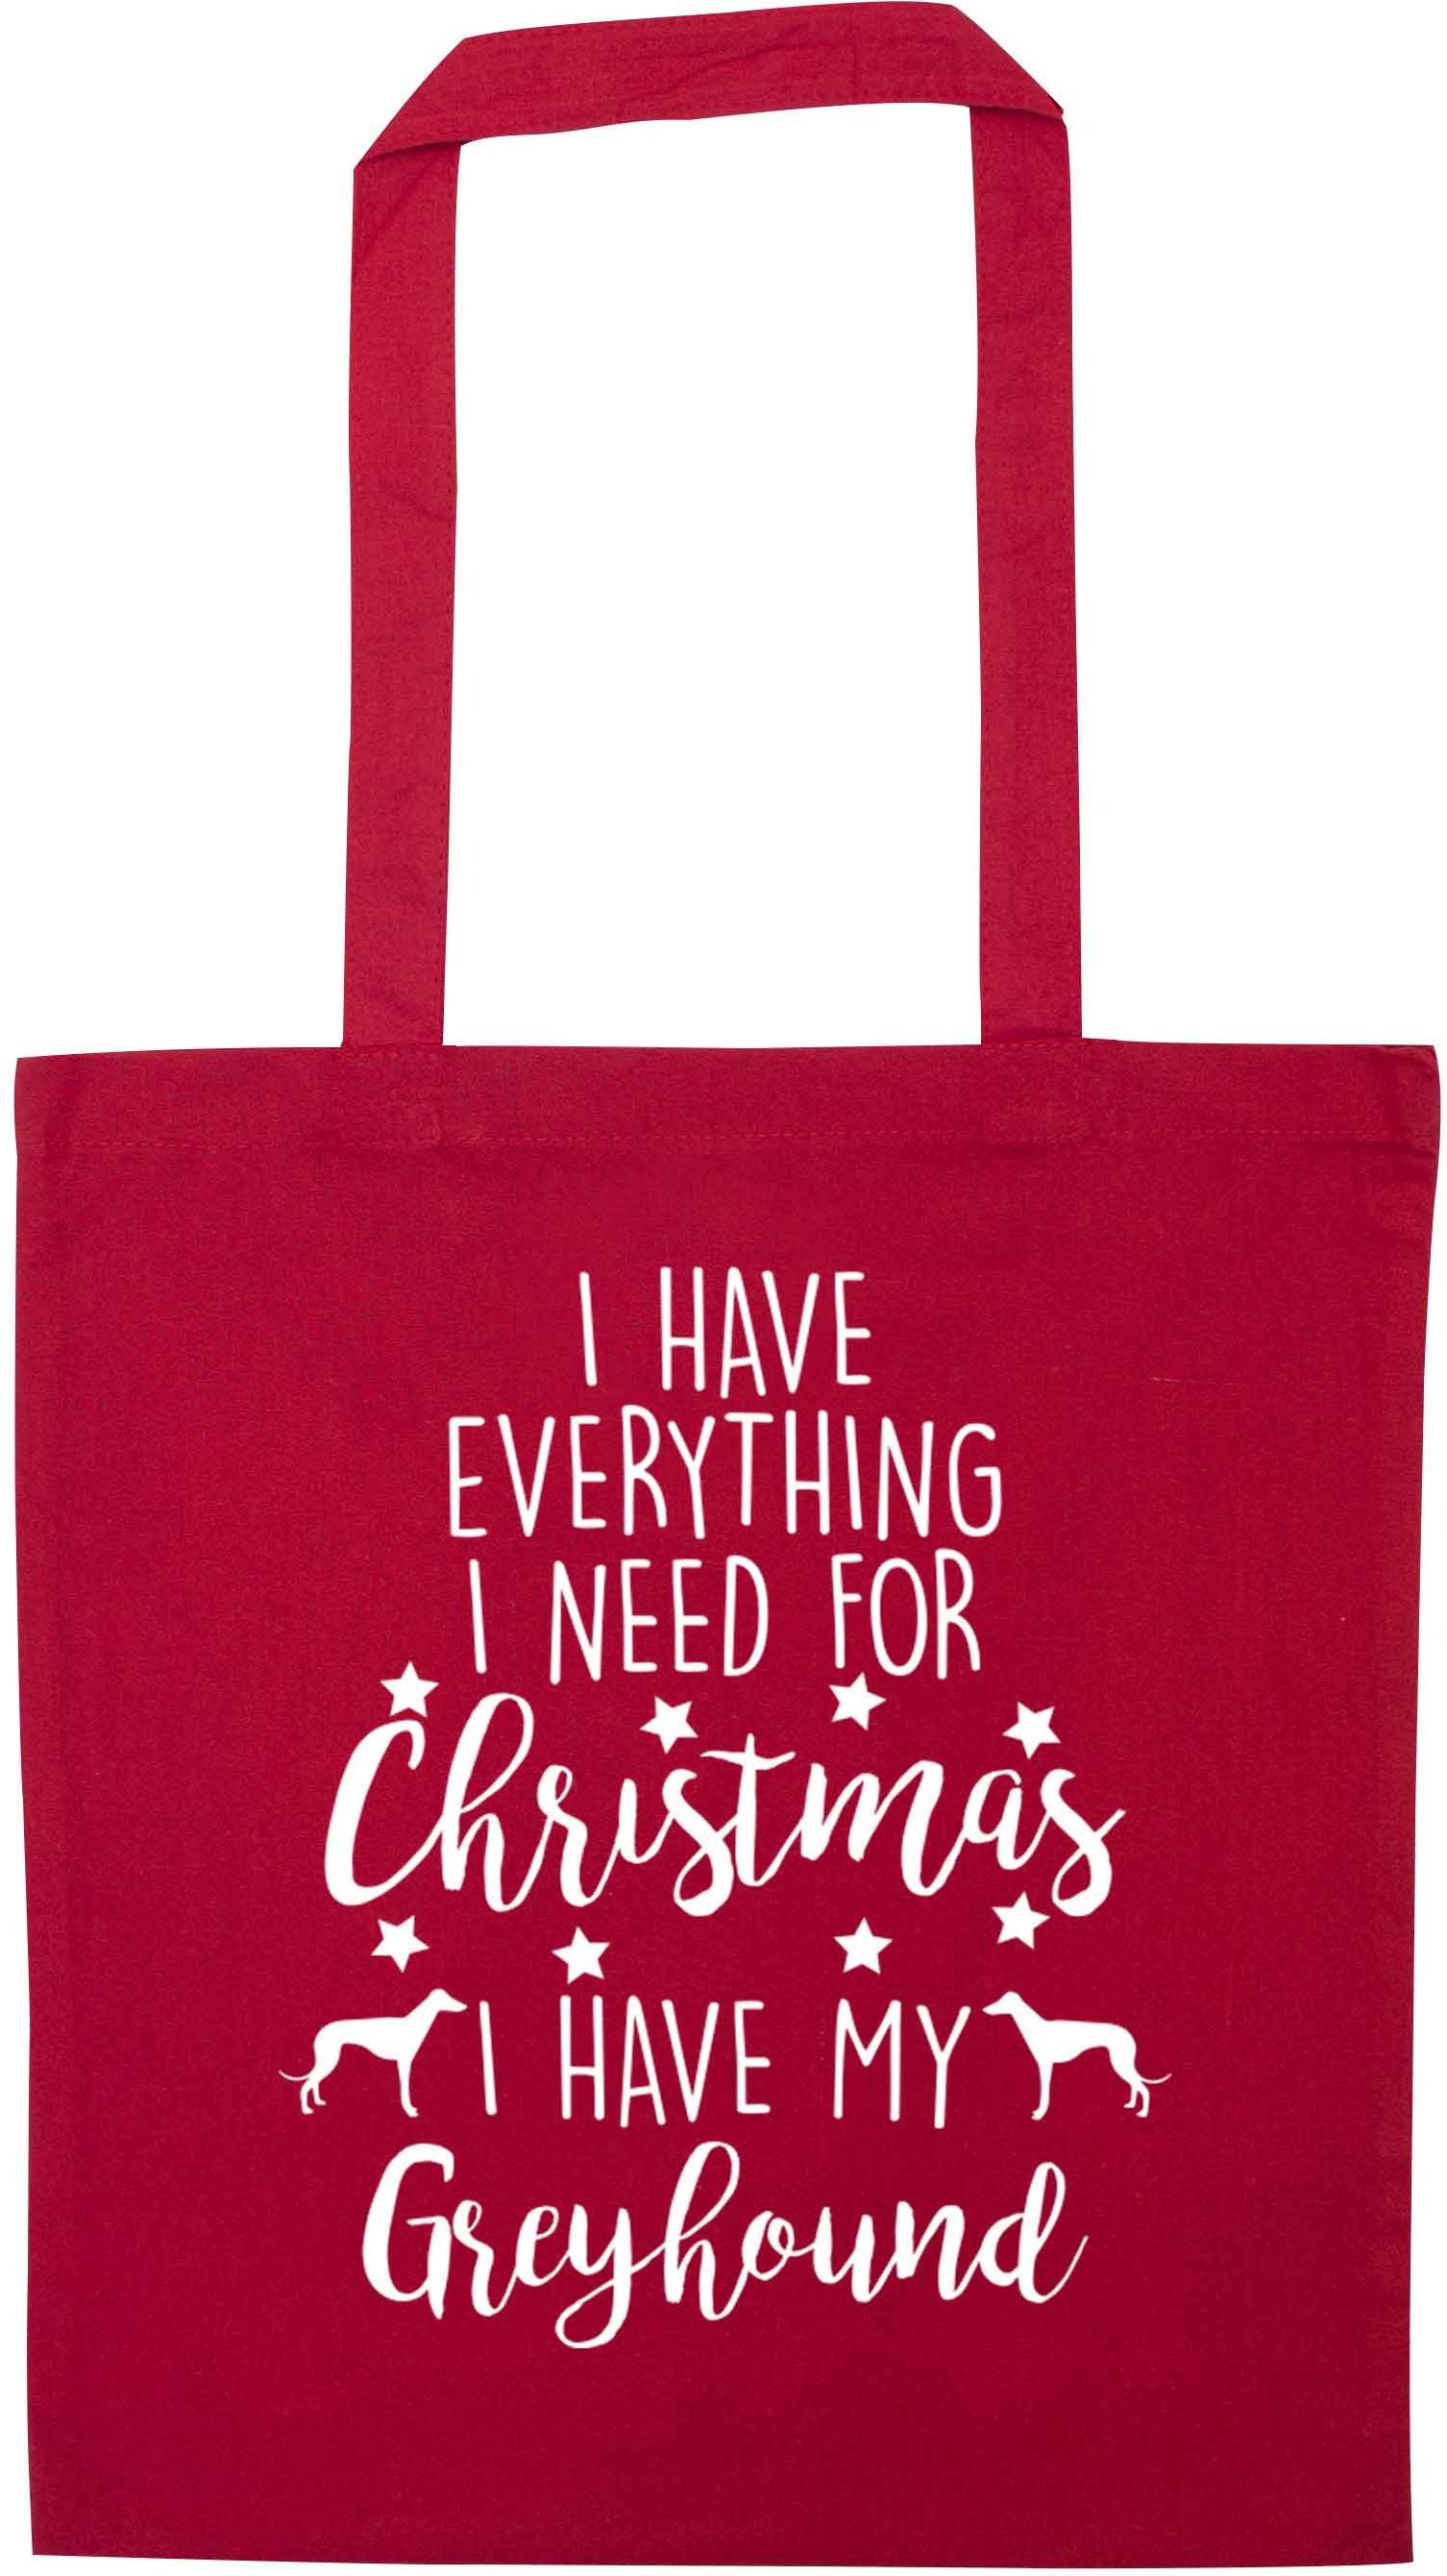 I have everything I need for Christmas I have my greyhound red tote bag